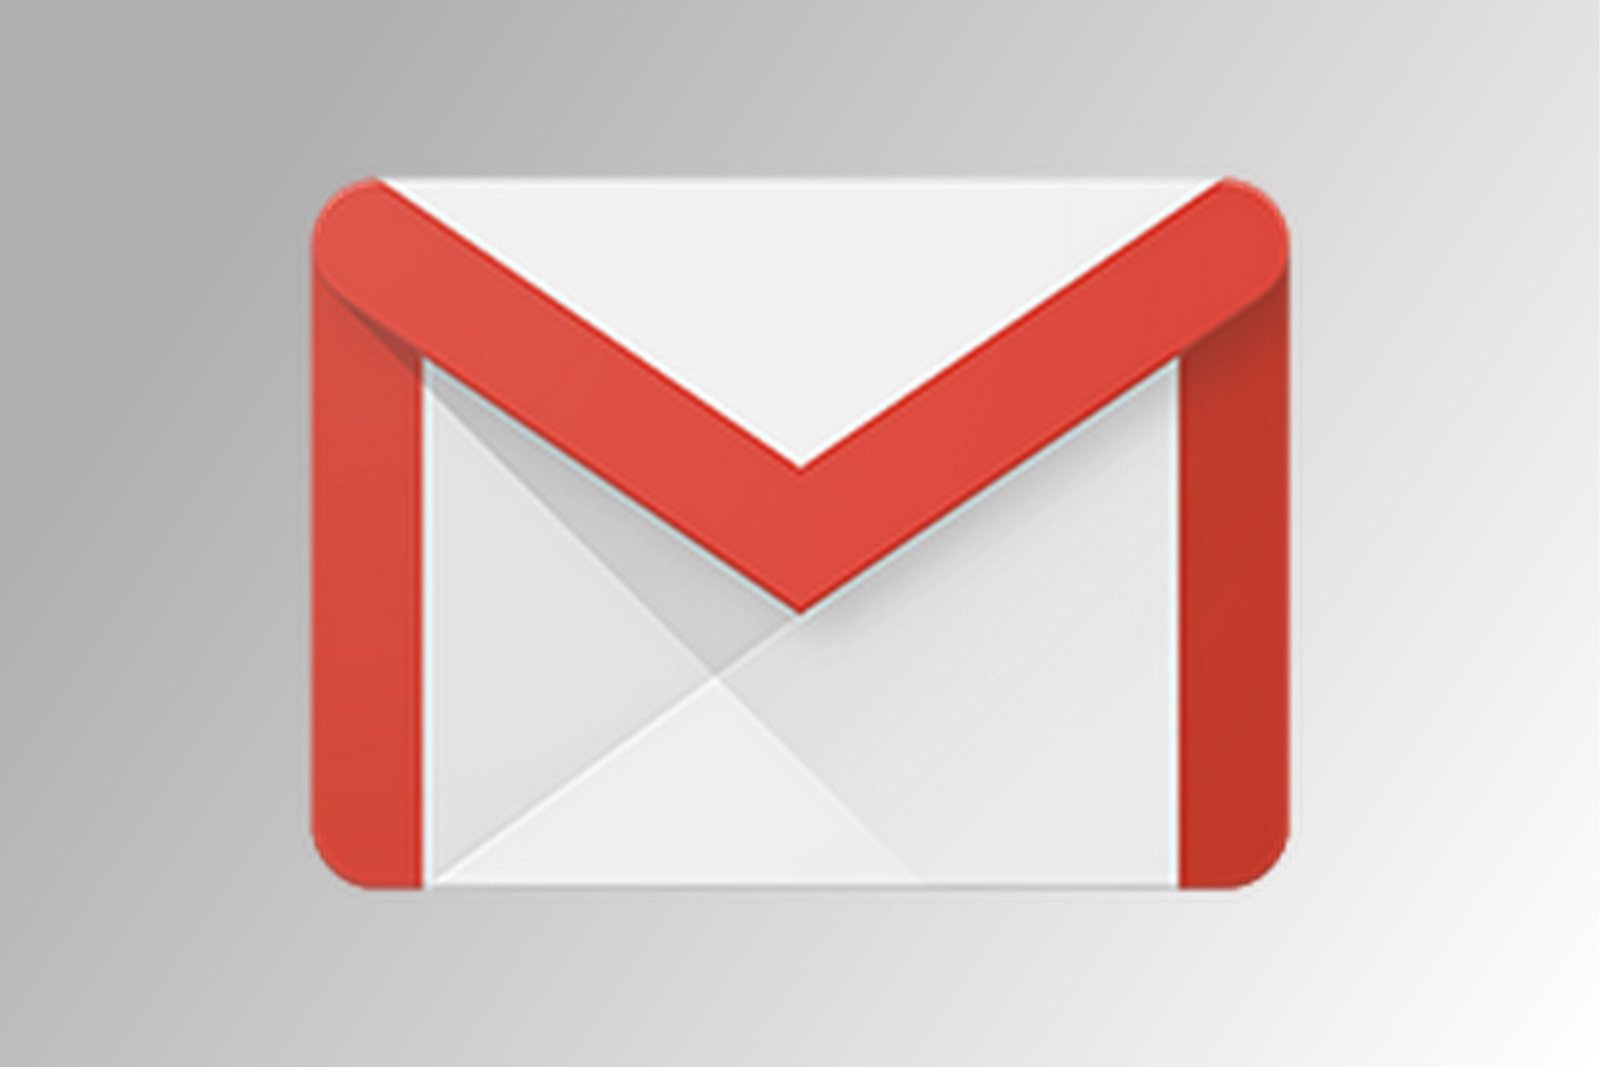 The option to dapper up your Gmail inbox by quick deleting weak email